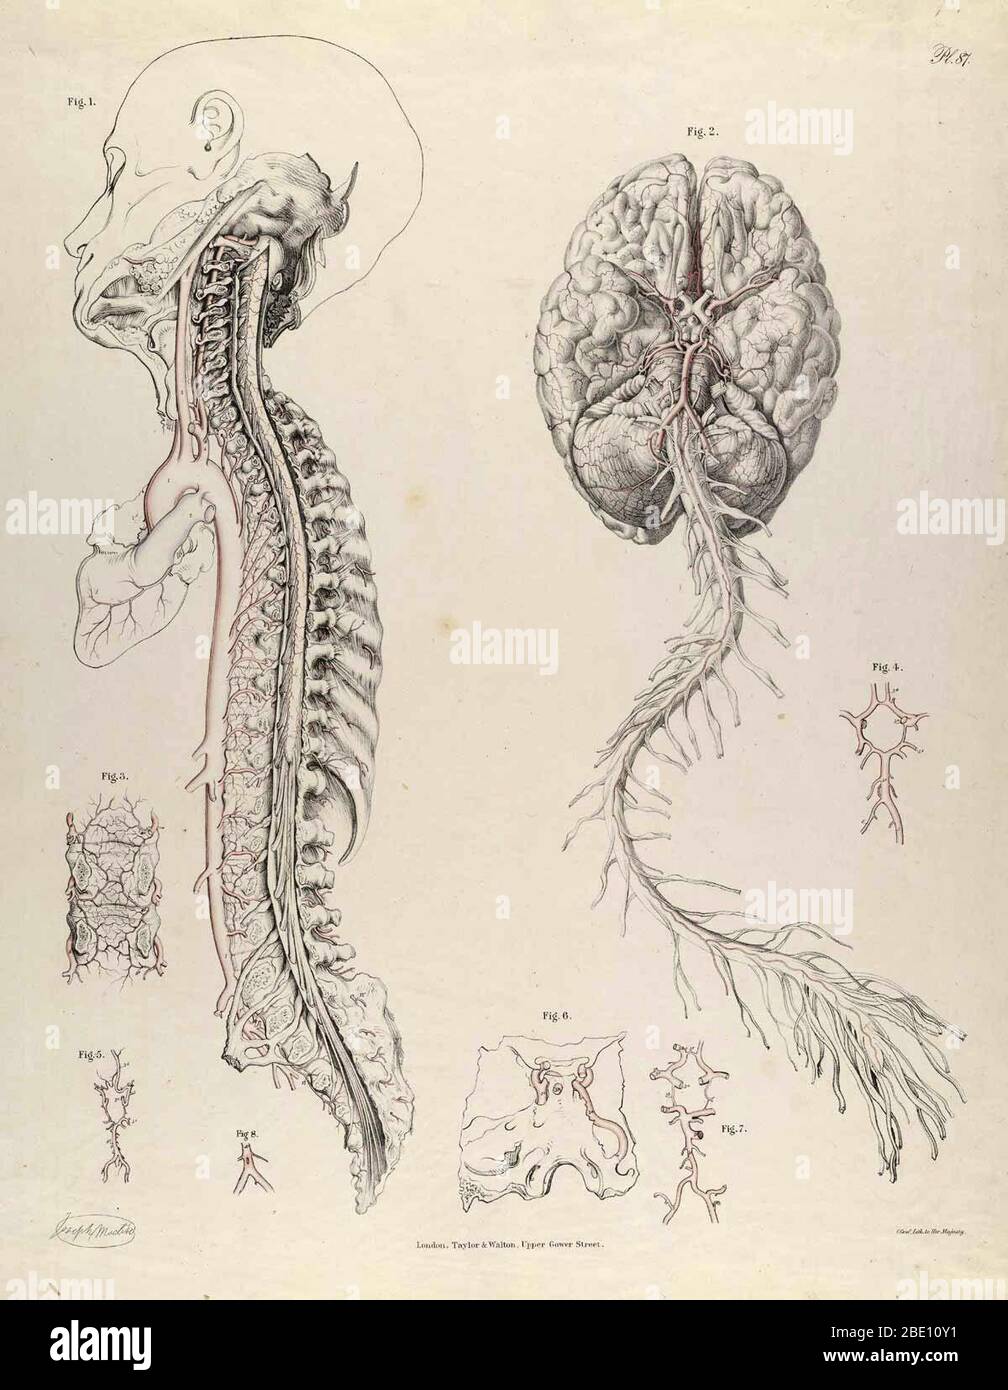 Illustration from the Anatomy of the Arteries of the Human Body with its applications to pathology and operative surgery. By Richard Quain, Published in 1844. Stock Photo